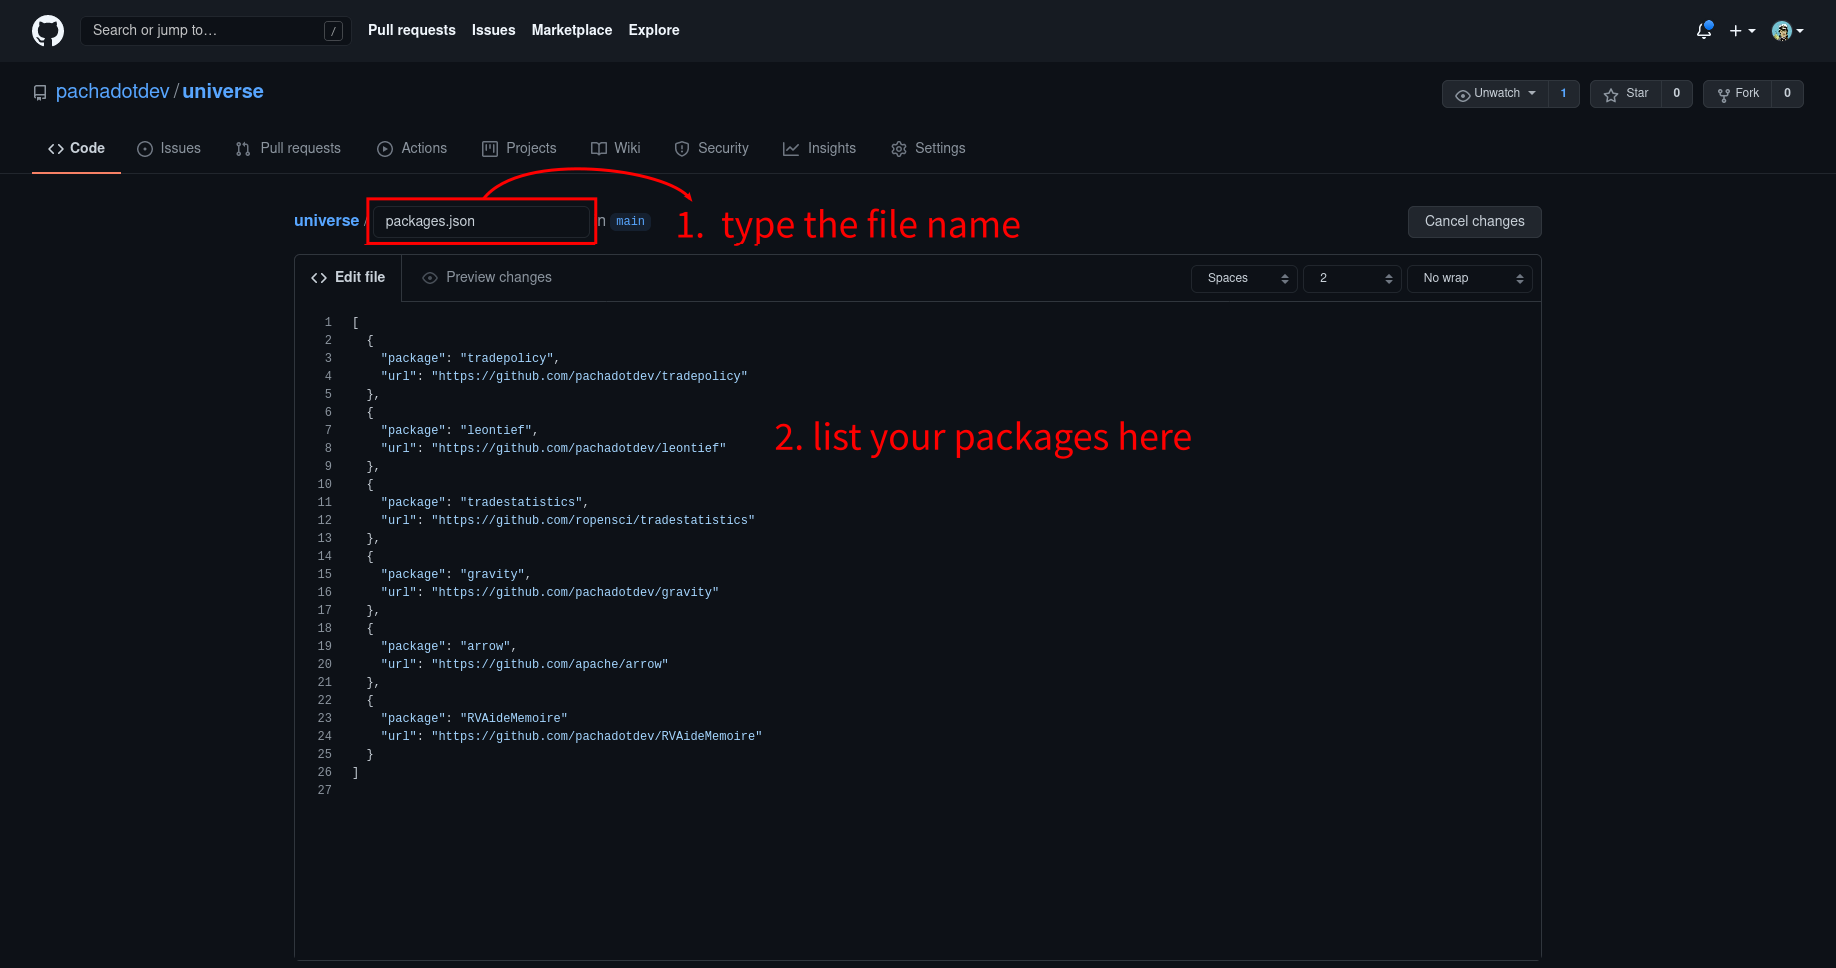 type the file name 'packages.json' in the first box, then list your 
packages in the larger text box